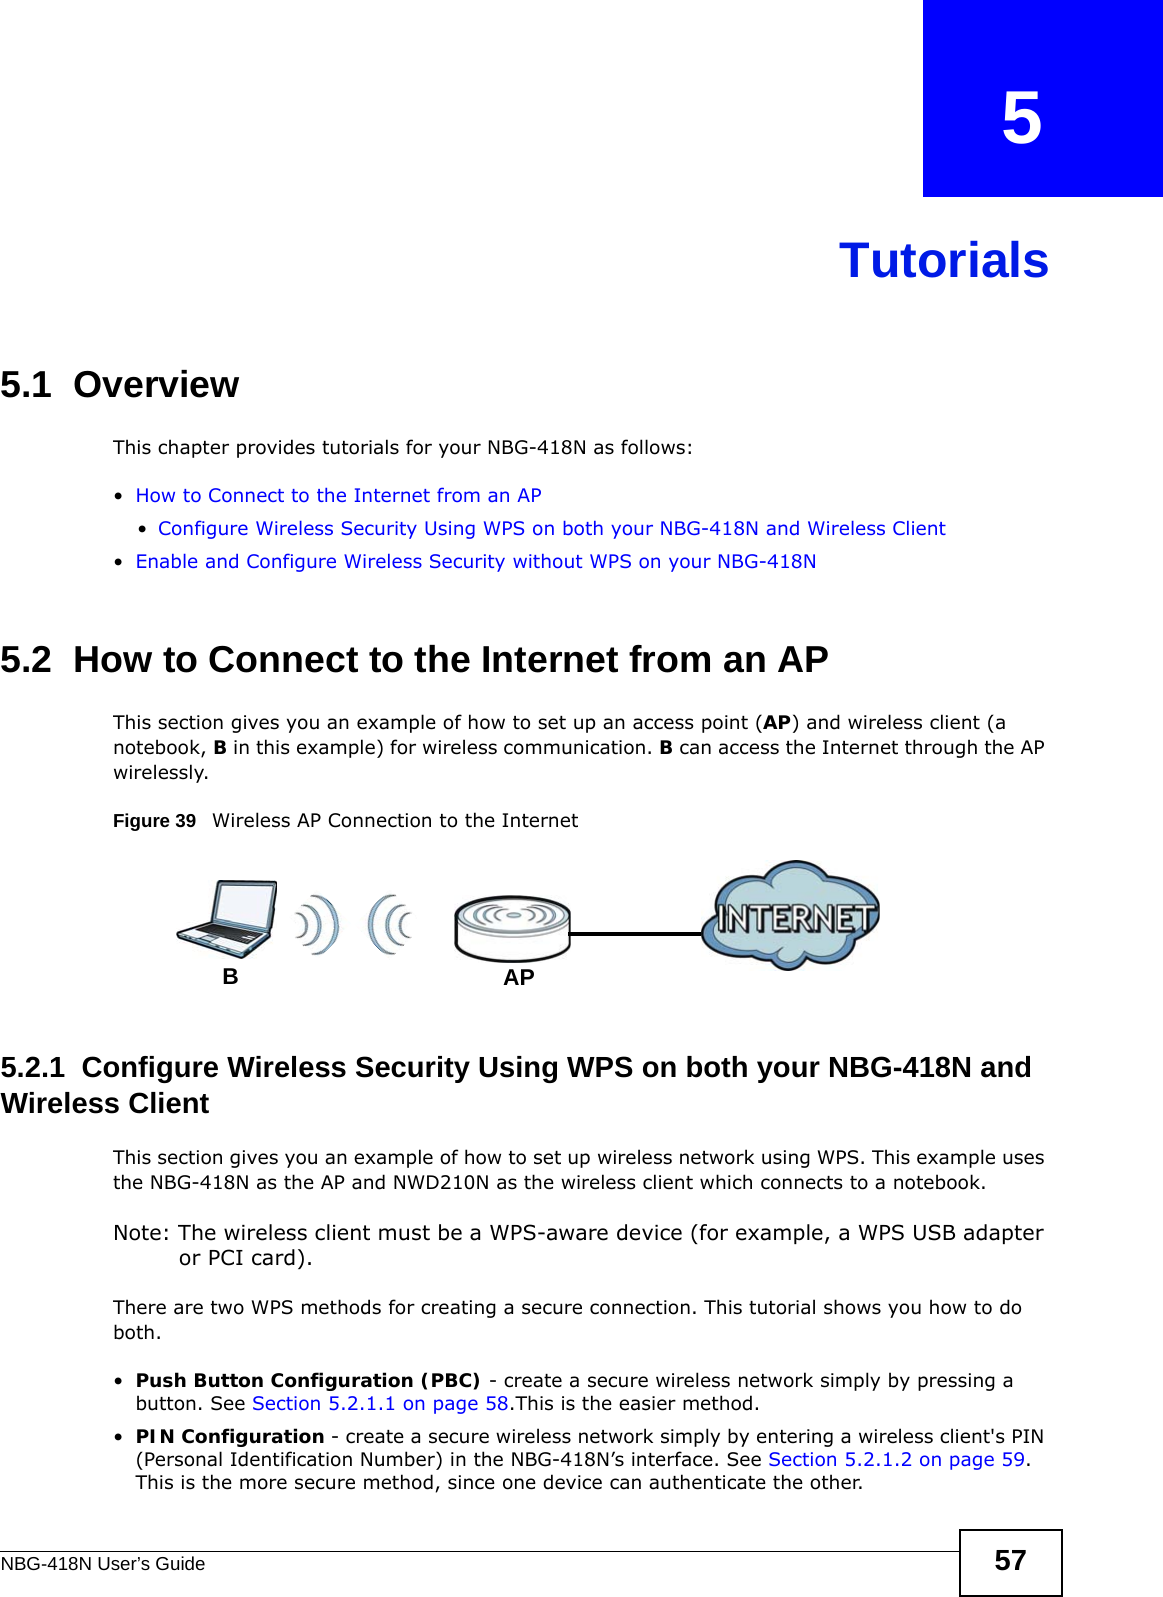 NBG-418N User’s Guide 57CHAPTER   5Tutorials5.1  OverviewThis chapter provides tutorials for your NBG-418N as follows:•How to Connect to the Internet from an AP•Configure Wireless Security Using WPS on both your NBG-418N and Wireless Client•Enable and Configure Wireless Security without WPS on your NBG-418N5.2  How to Connect to the Internet from an APThis section gives you an example of how to set up an access point (AP) and wireless client (a notebook, B in this example) for wireless communication. B can access the Internet through the AP wirelessly.Figure 39   Wireless AP Connection to the Internet5.2.1  Configure Wireless Security Using WPS on both your NBG-418N and Wireless ClientThis section gives you an example of how to set up wireless network using WPS. This example uses the NBG-418N as the AP and NWD210N as the wireless client which connects to a notebook. Note: The wireless client must be a WPS-aware device (for example, a WPS USB adapter or PCI card).There are two WPS methods for creating a secure connection. This tutorial shows you how to do both.•Push Button Configuration (PBC) - create a secure wireless network simply by pressing a button. See Section 5.2.1.1 on page 58.This is the easier method.•PIN Configuration - create a secure wireless network simply by entering a wireless client&apos;s PIN (Personal Identification Number) in the NBG-418N’s interface. See Section 5.2.1.2 on page 59. This is the more secure method, since one device can authenticate the other.APB